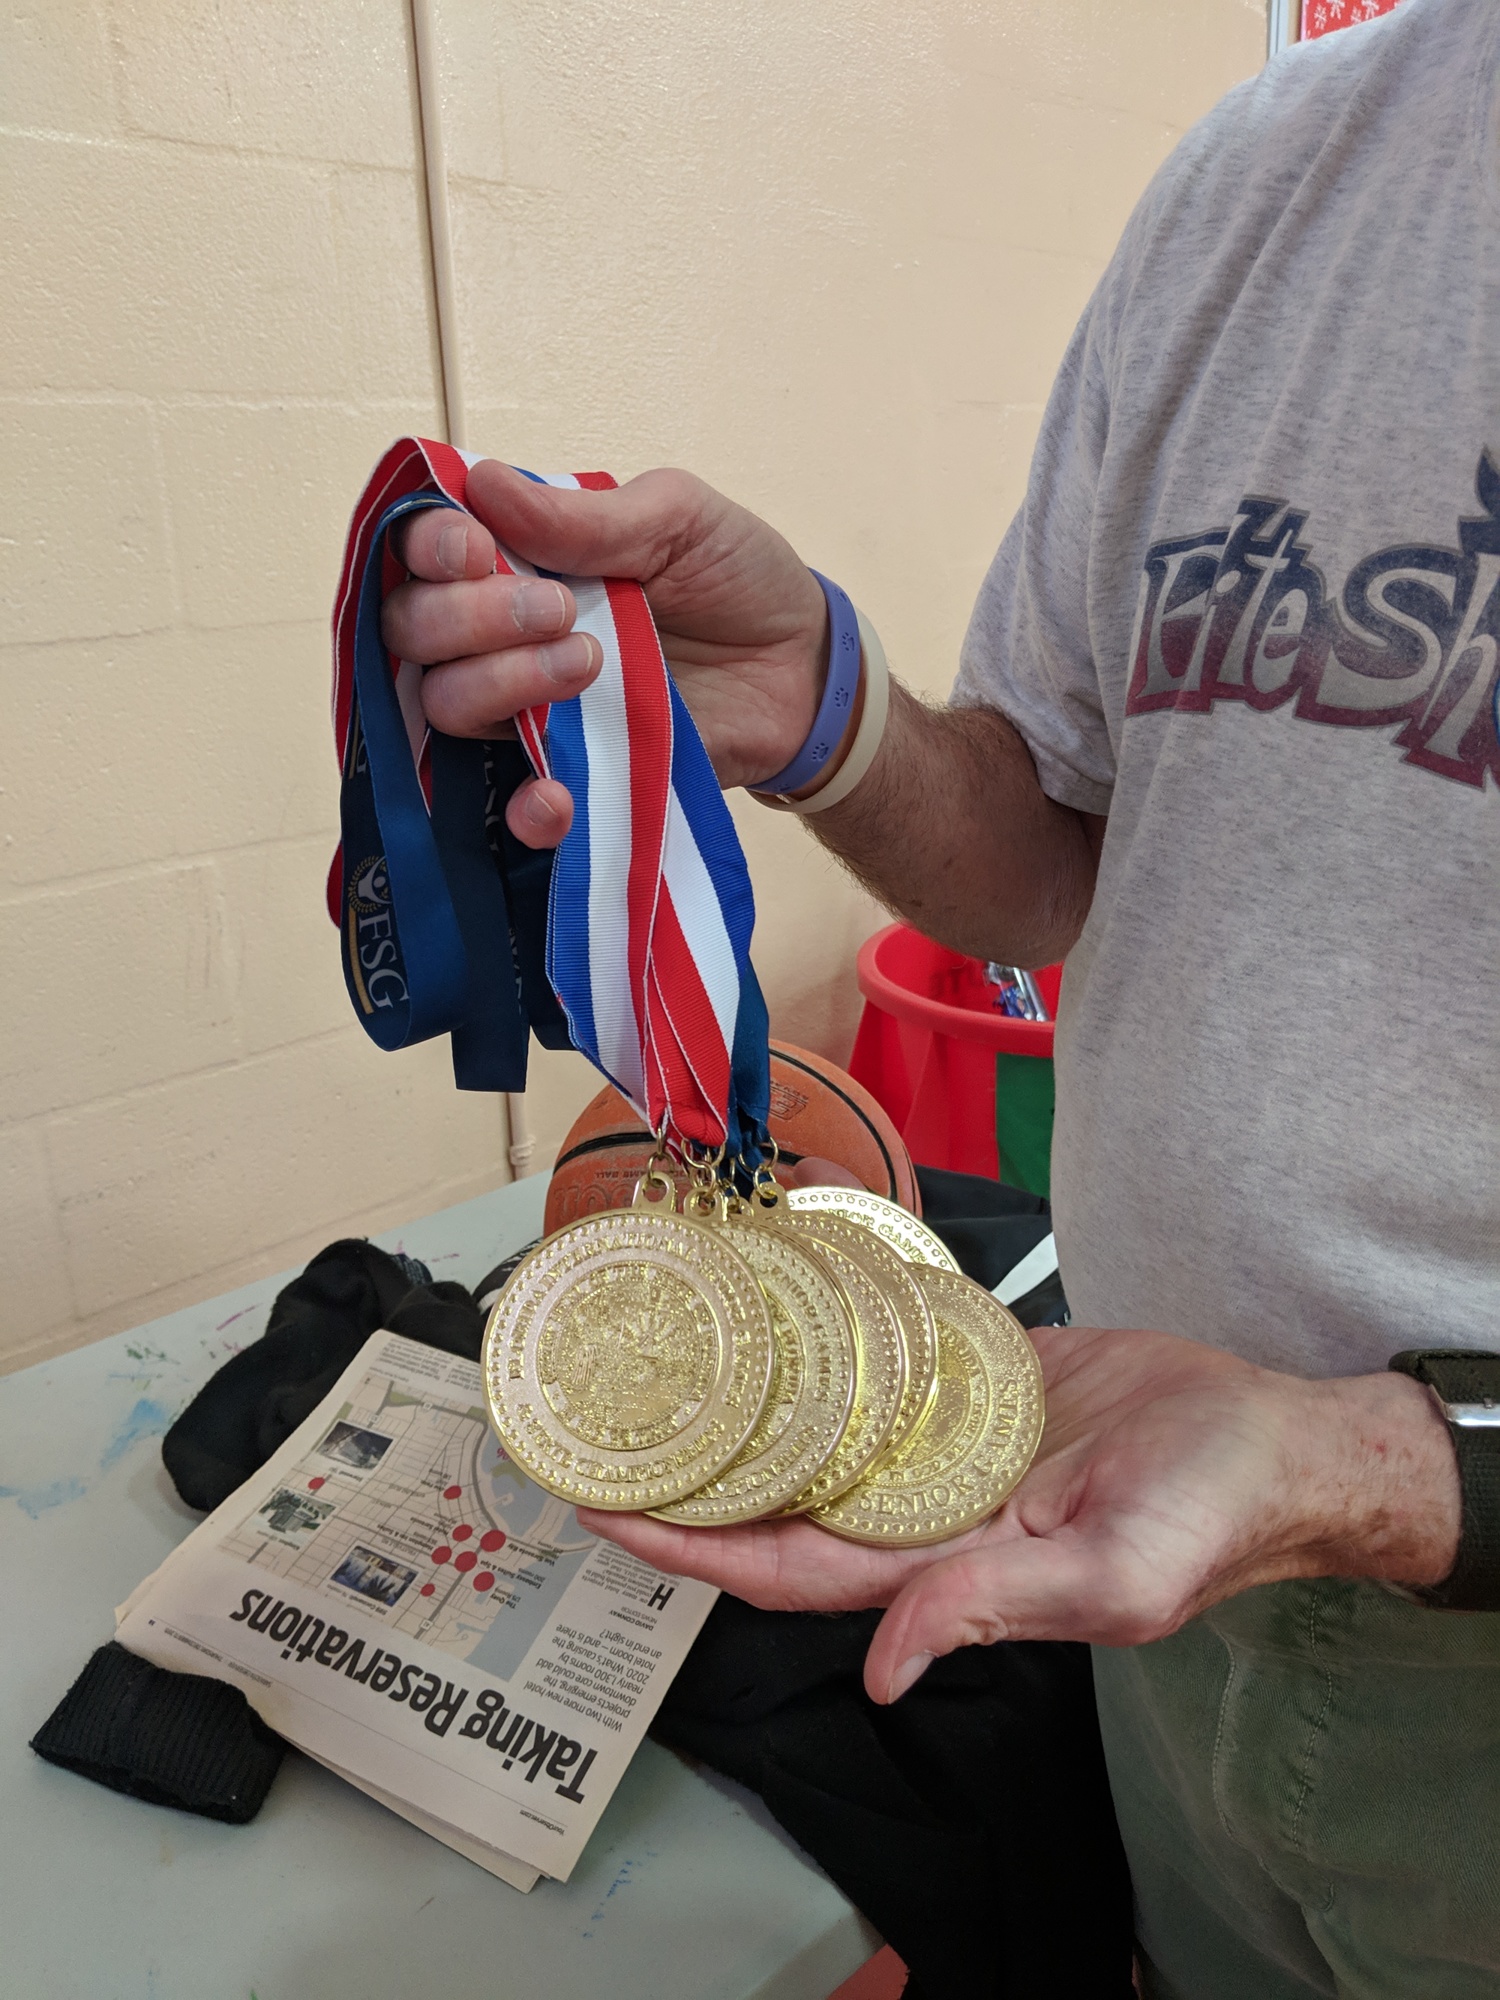 Ron Wyckoff shows off his Florida Senior Games gold medals.